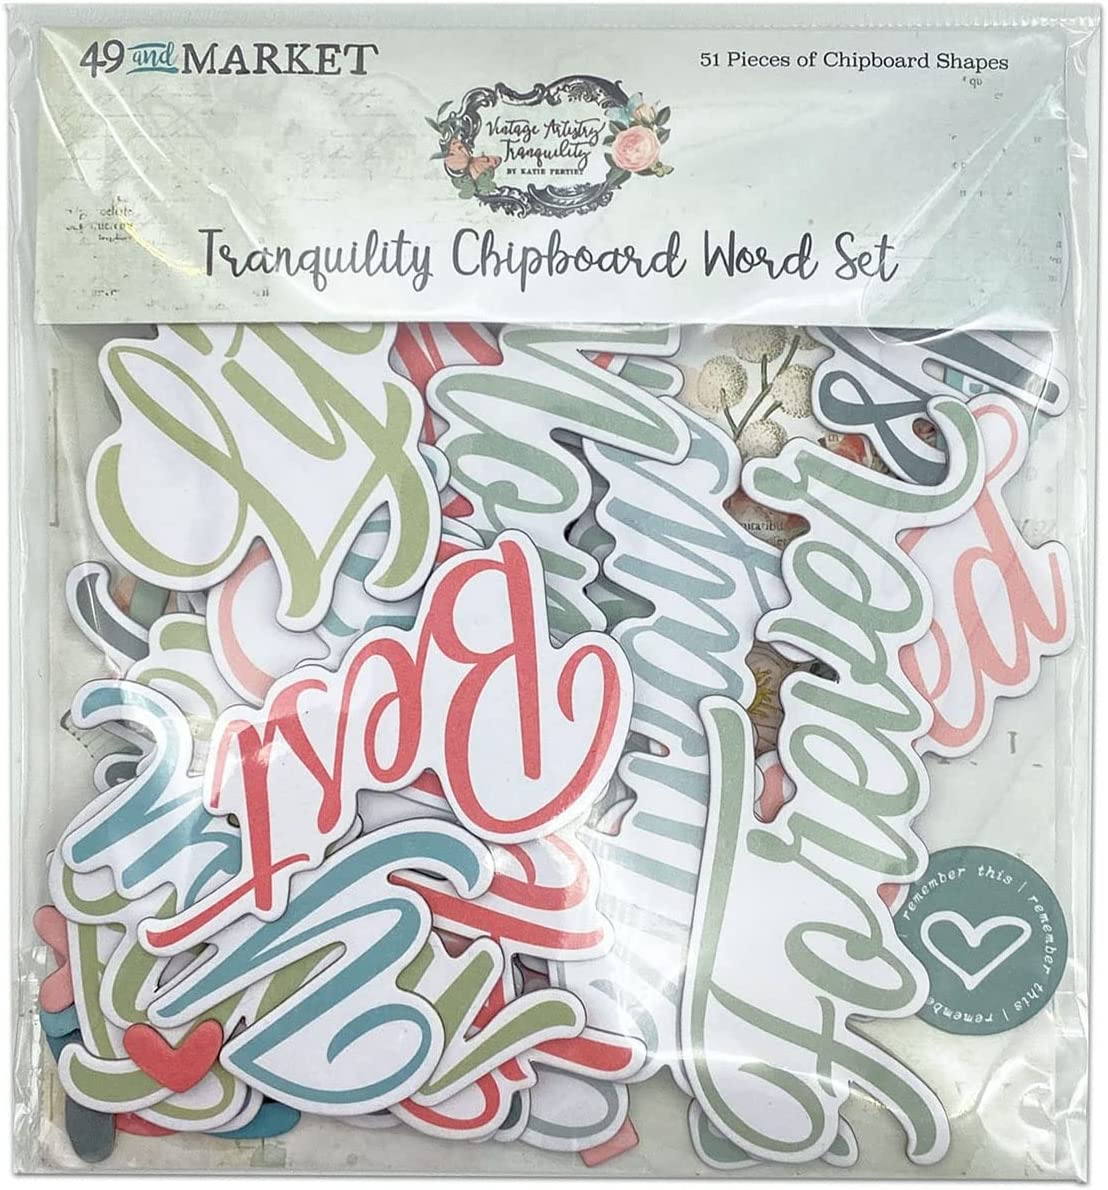 Vintage Artistry Tranquility Chipboard Words Set - 49 and Market